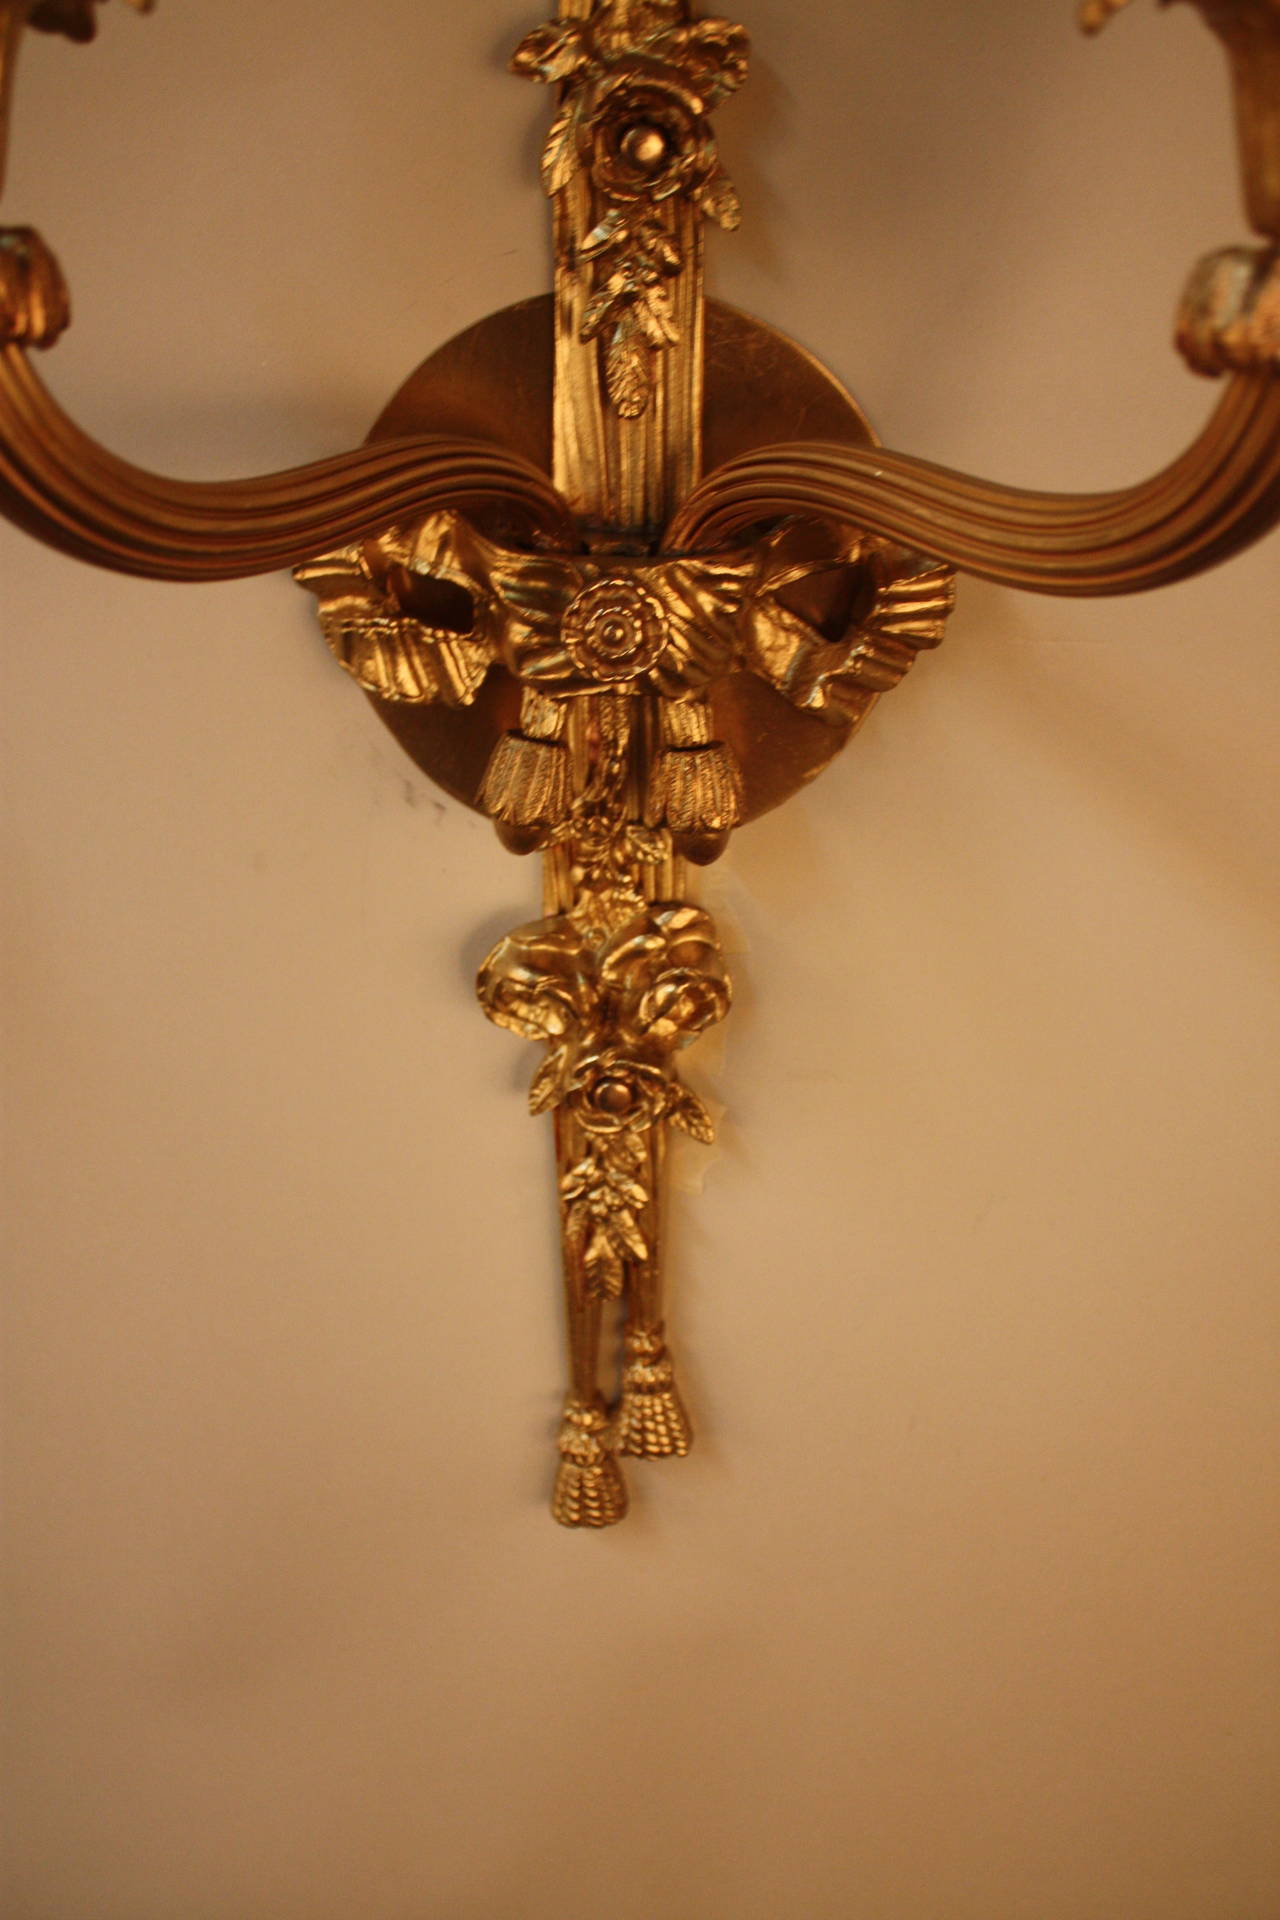 Mid-20th Century French Bronze Wall Sconces